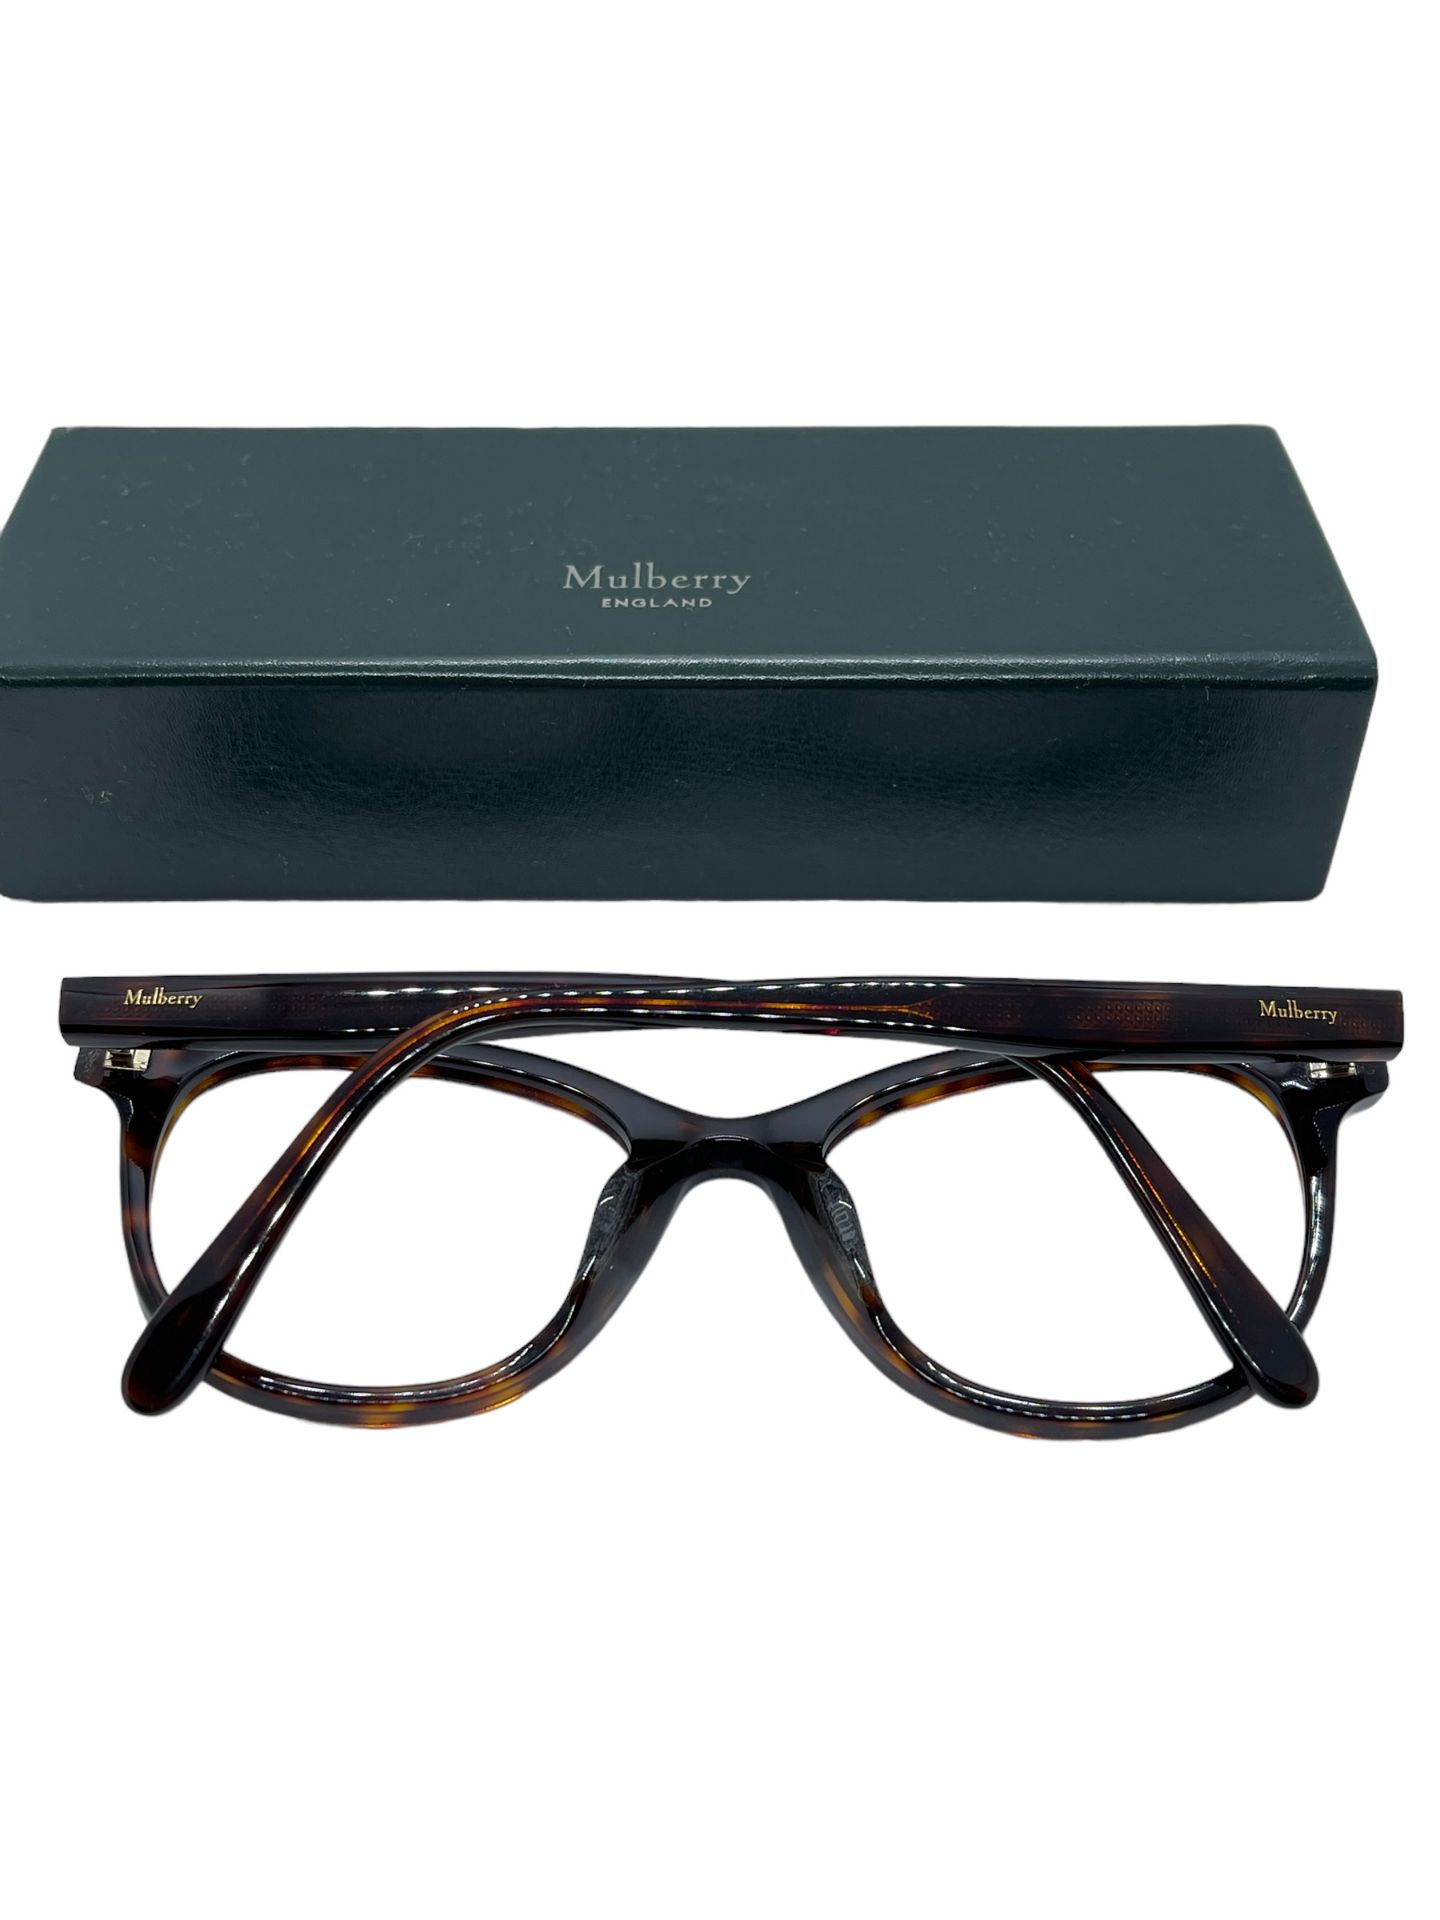 Mulberry unisex frames xdemo - Image 3 of 4